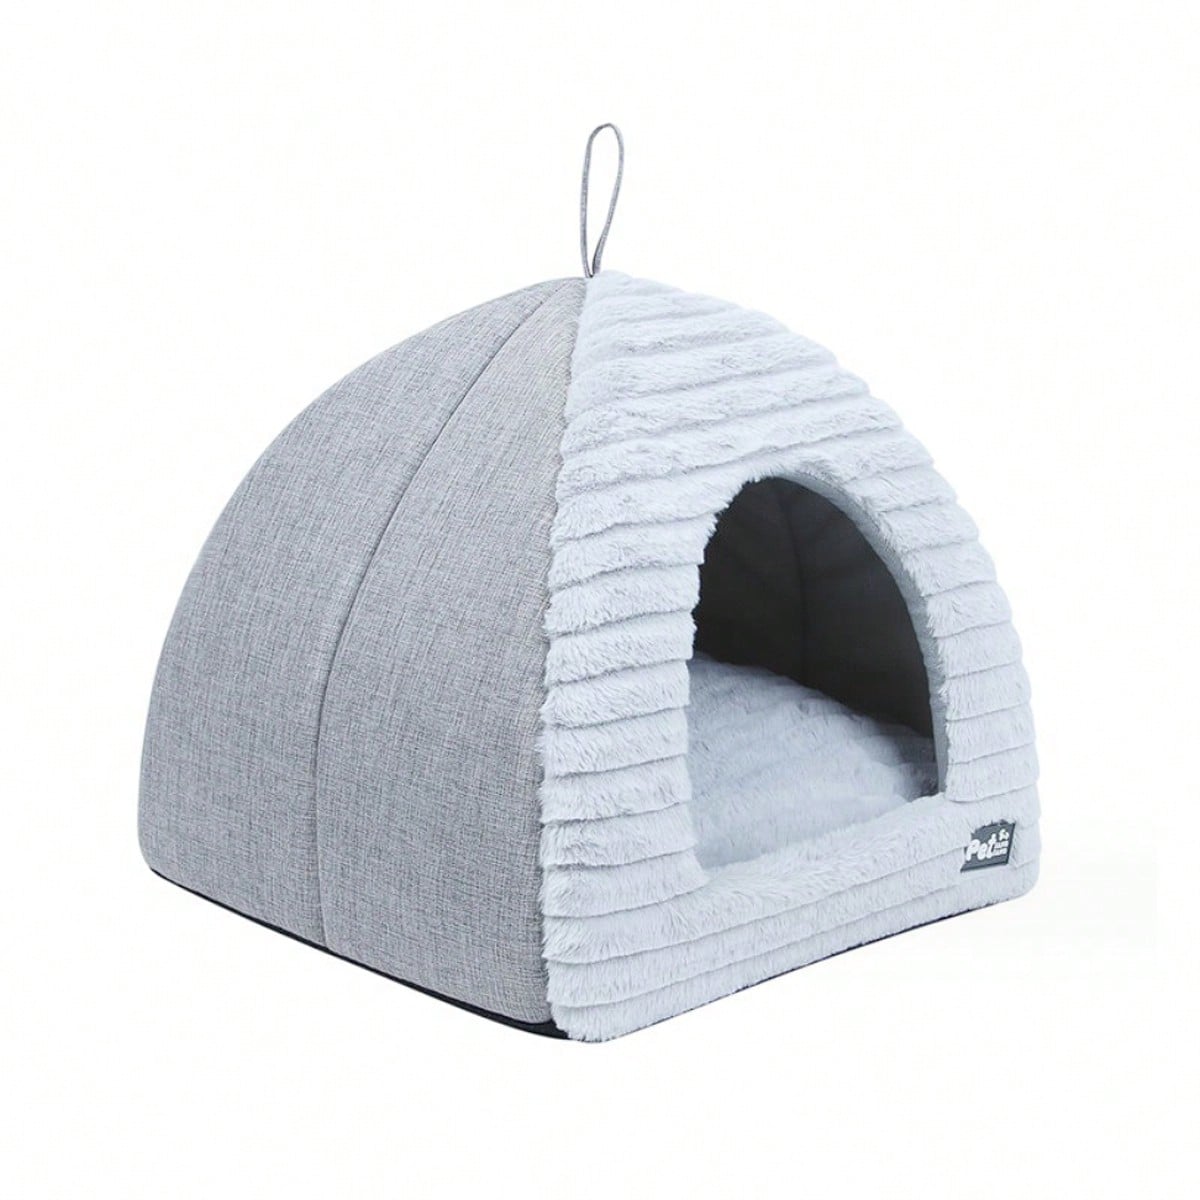 SHEIN Pet Cat Bed, Winter, Warm Faux Rabbit Fur Yurt Mongolia Nest For Small Dogs And Cats Grey L,M,S